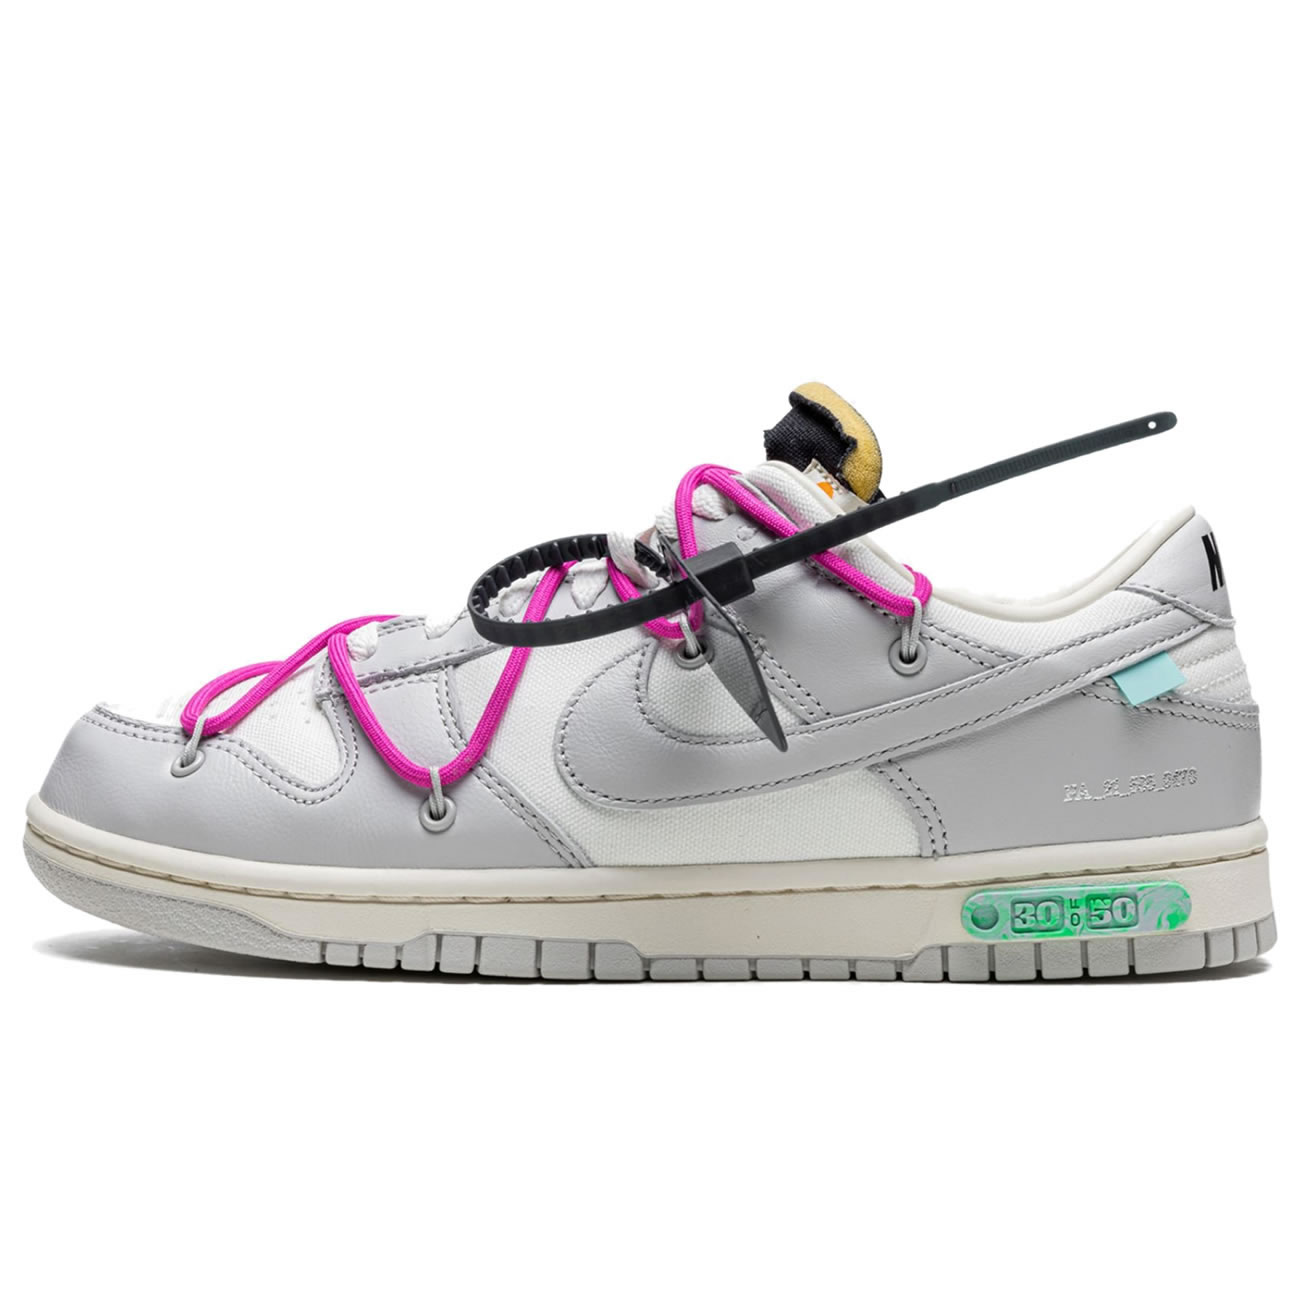 Off White Nike Sb Dunk Low Lot 30 Of 50 Sail Neutral Grey Pink Dm1602 122 (1) - newkick.org